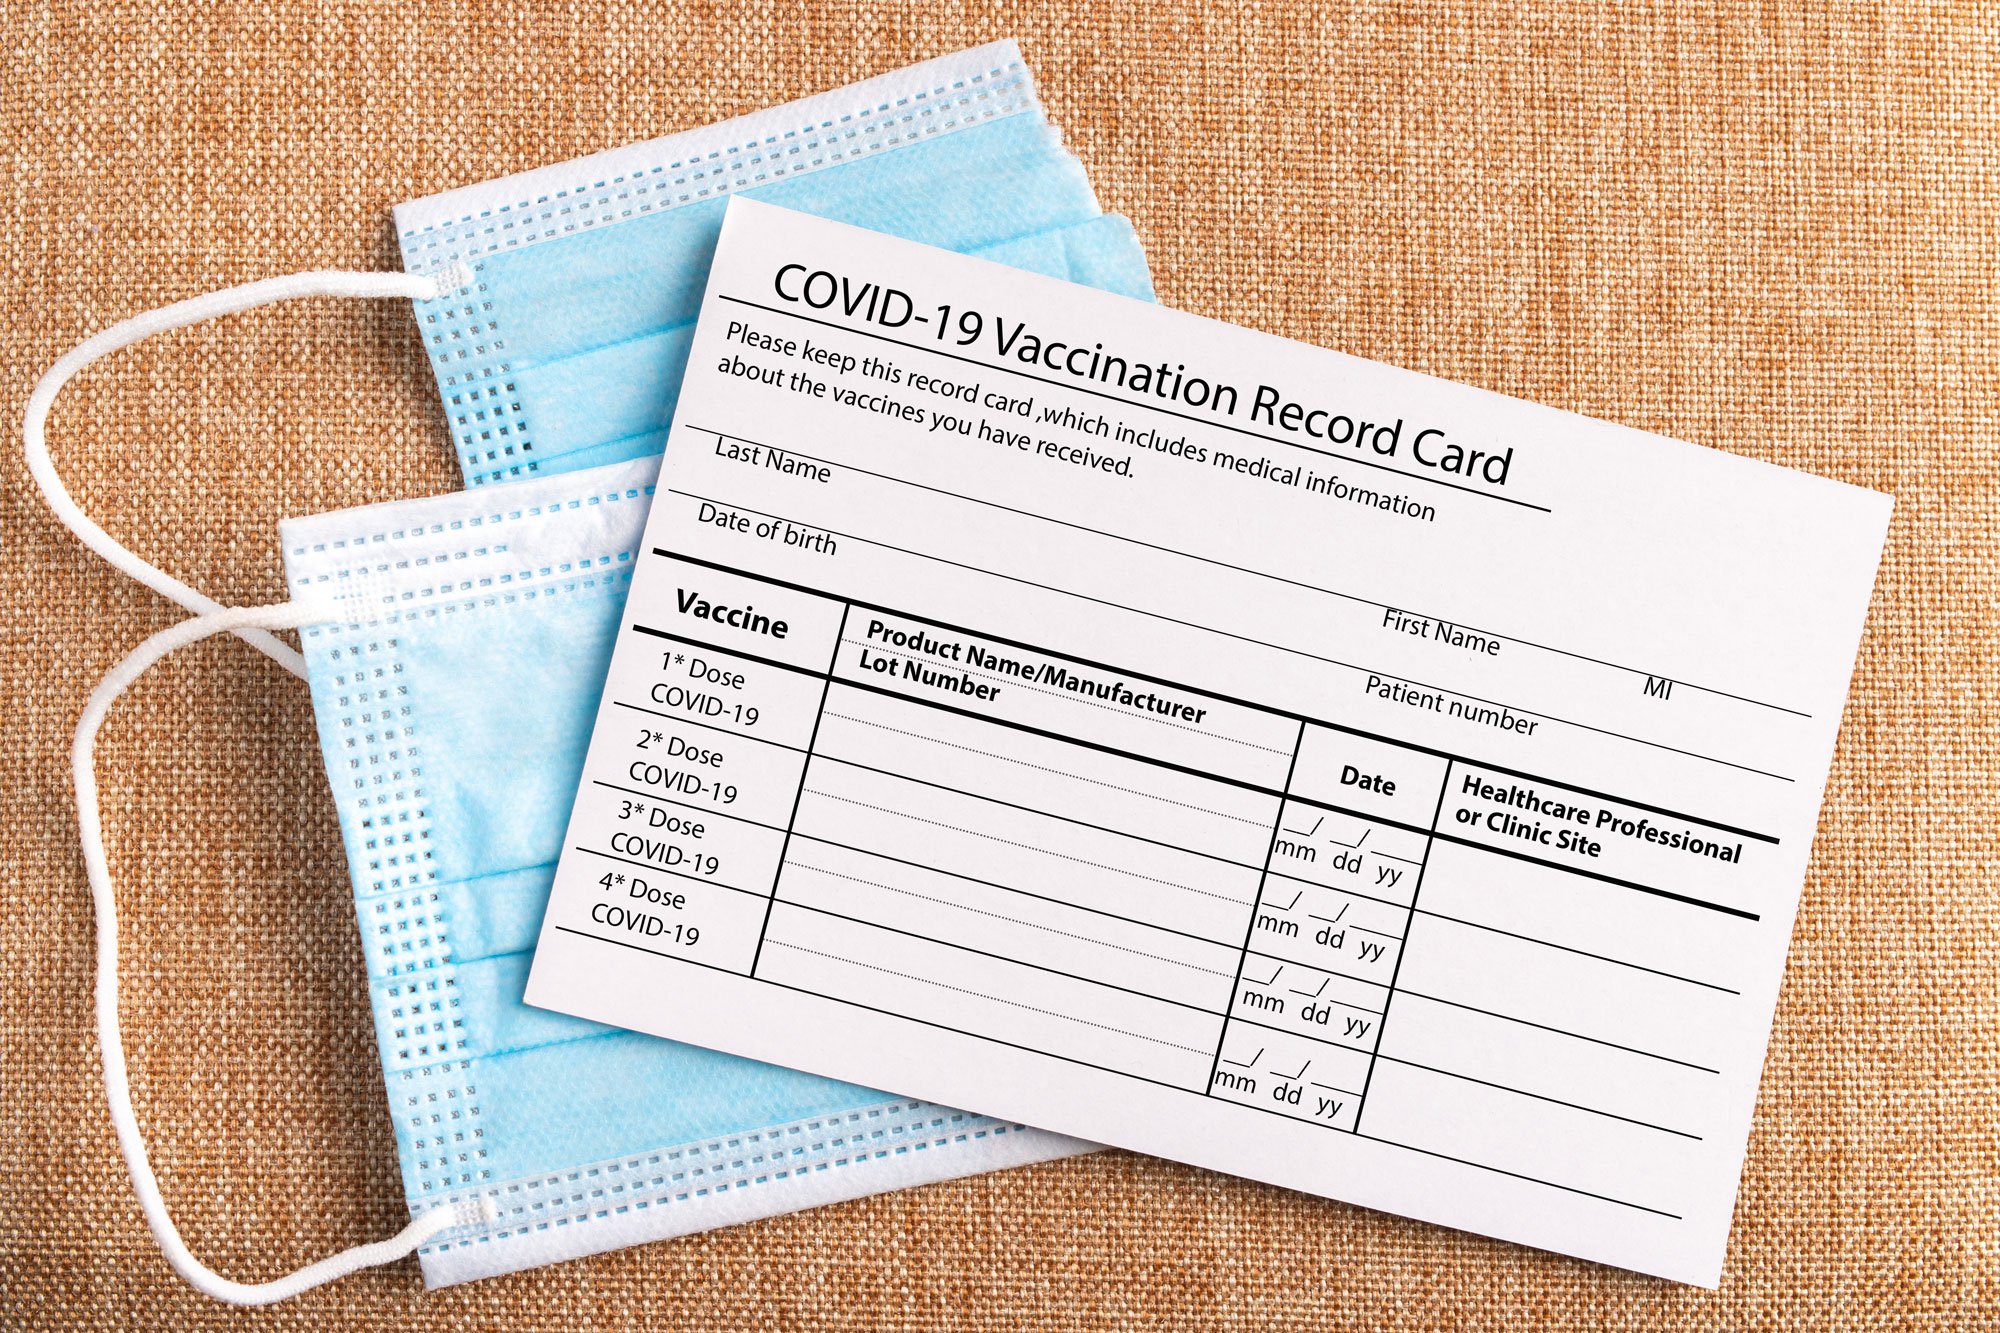 COVID-19 vaccination record card next to a medical procedure mask.